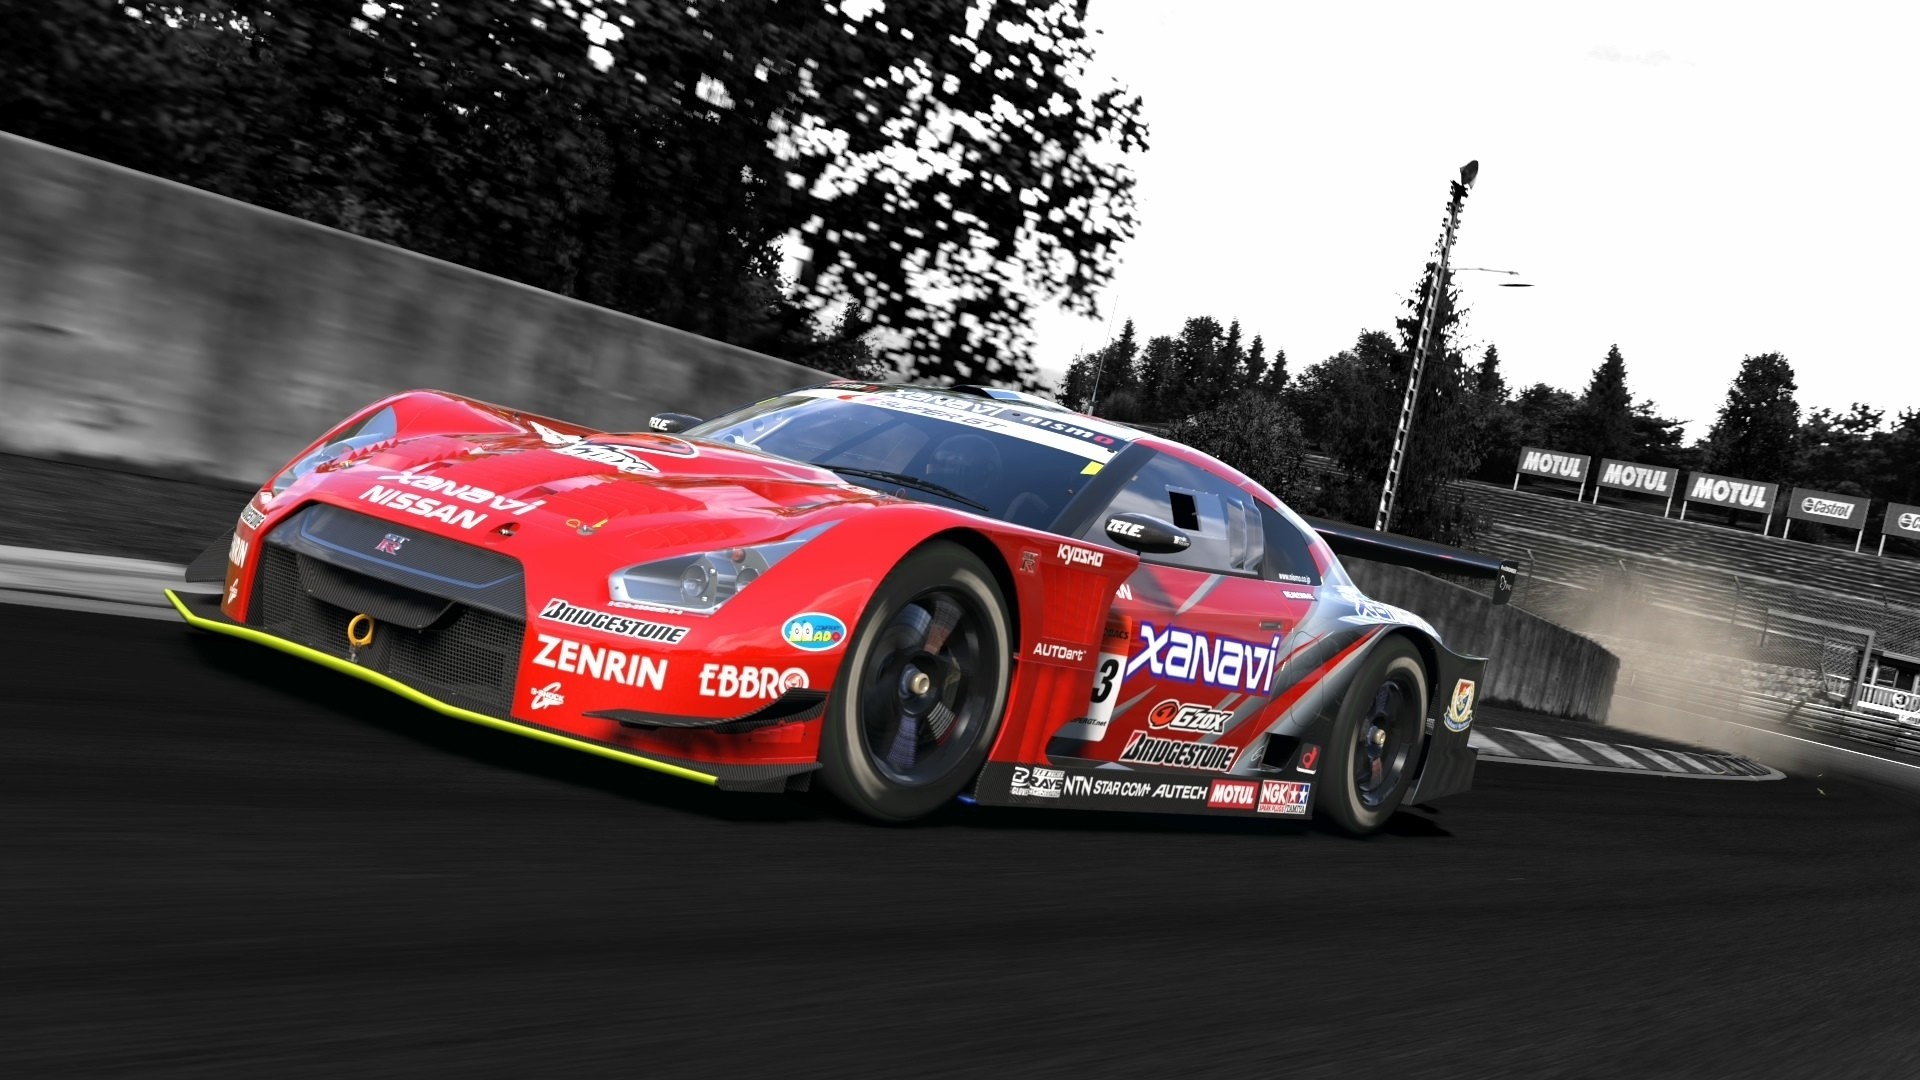 General 1920x1080 car race cars red cars vehicle livery Nissan Japanese cars